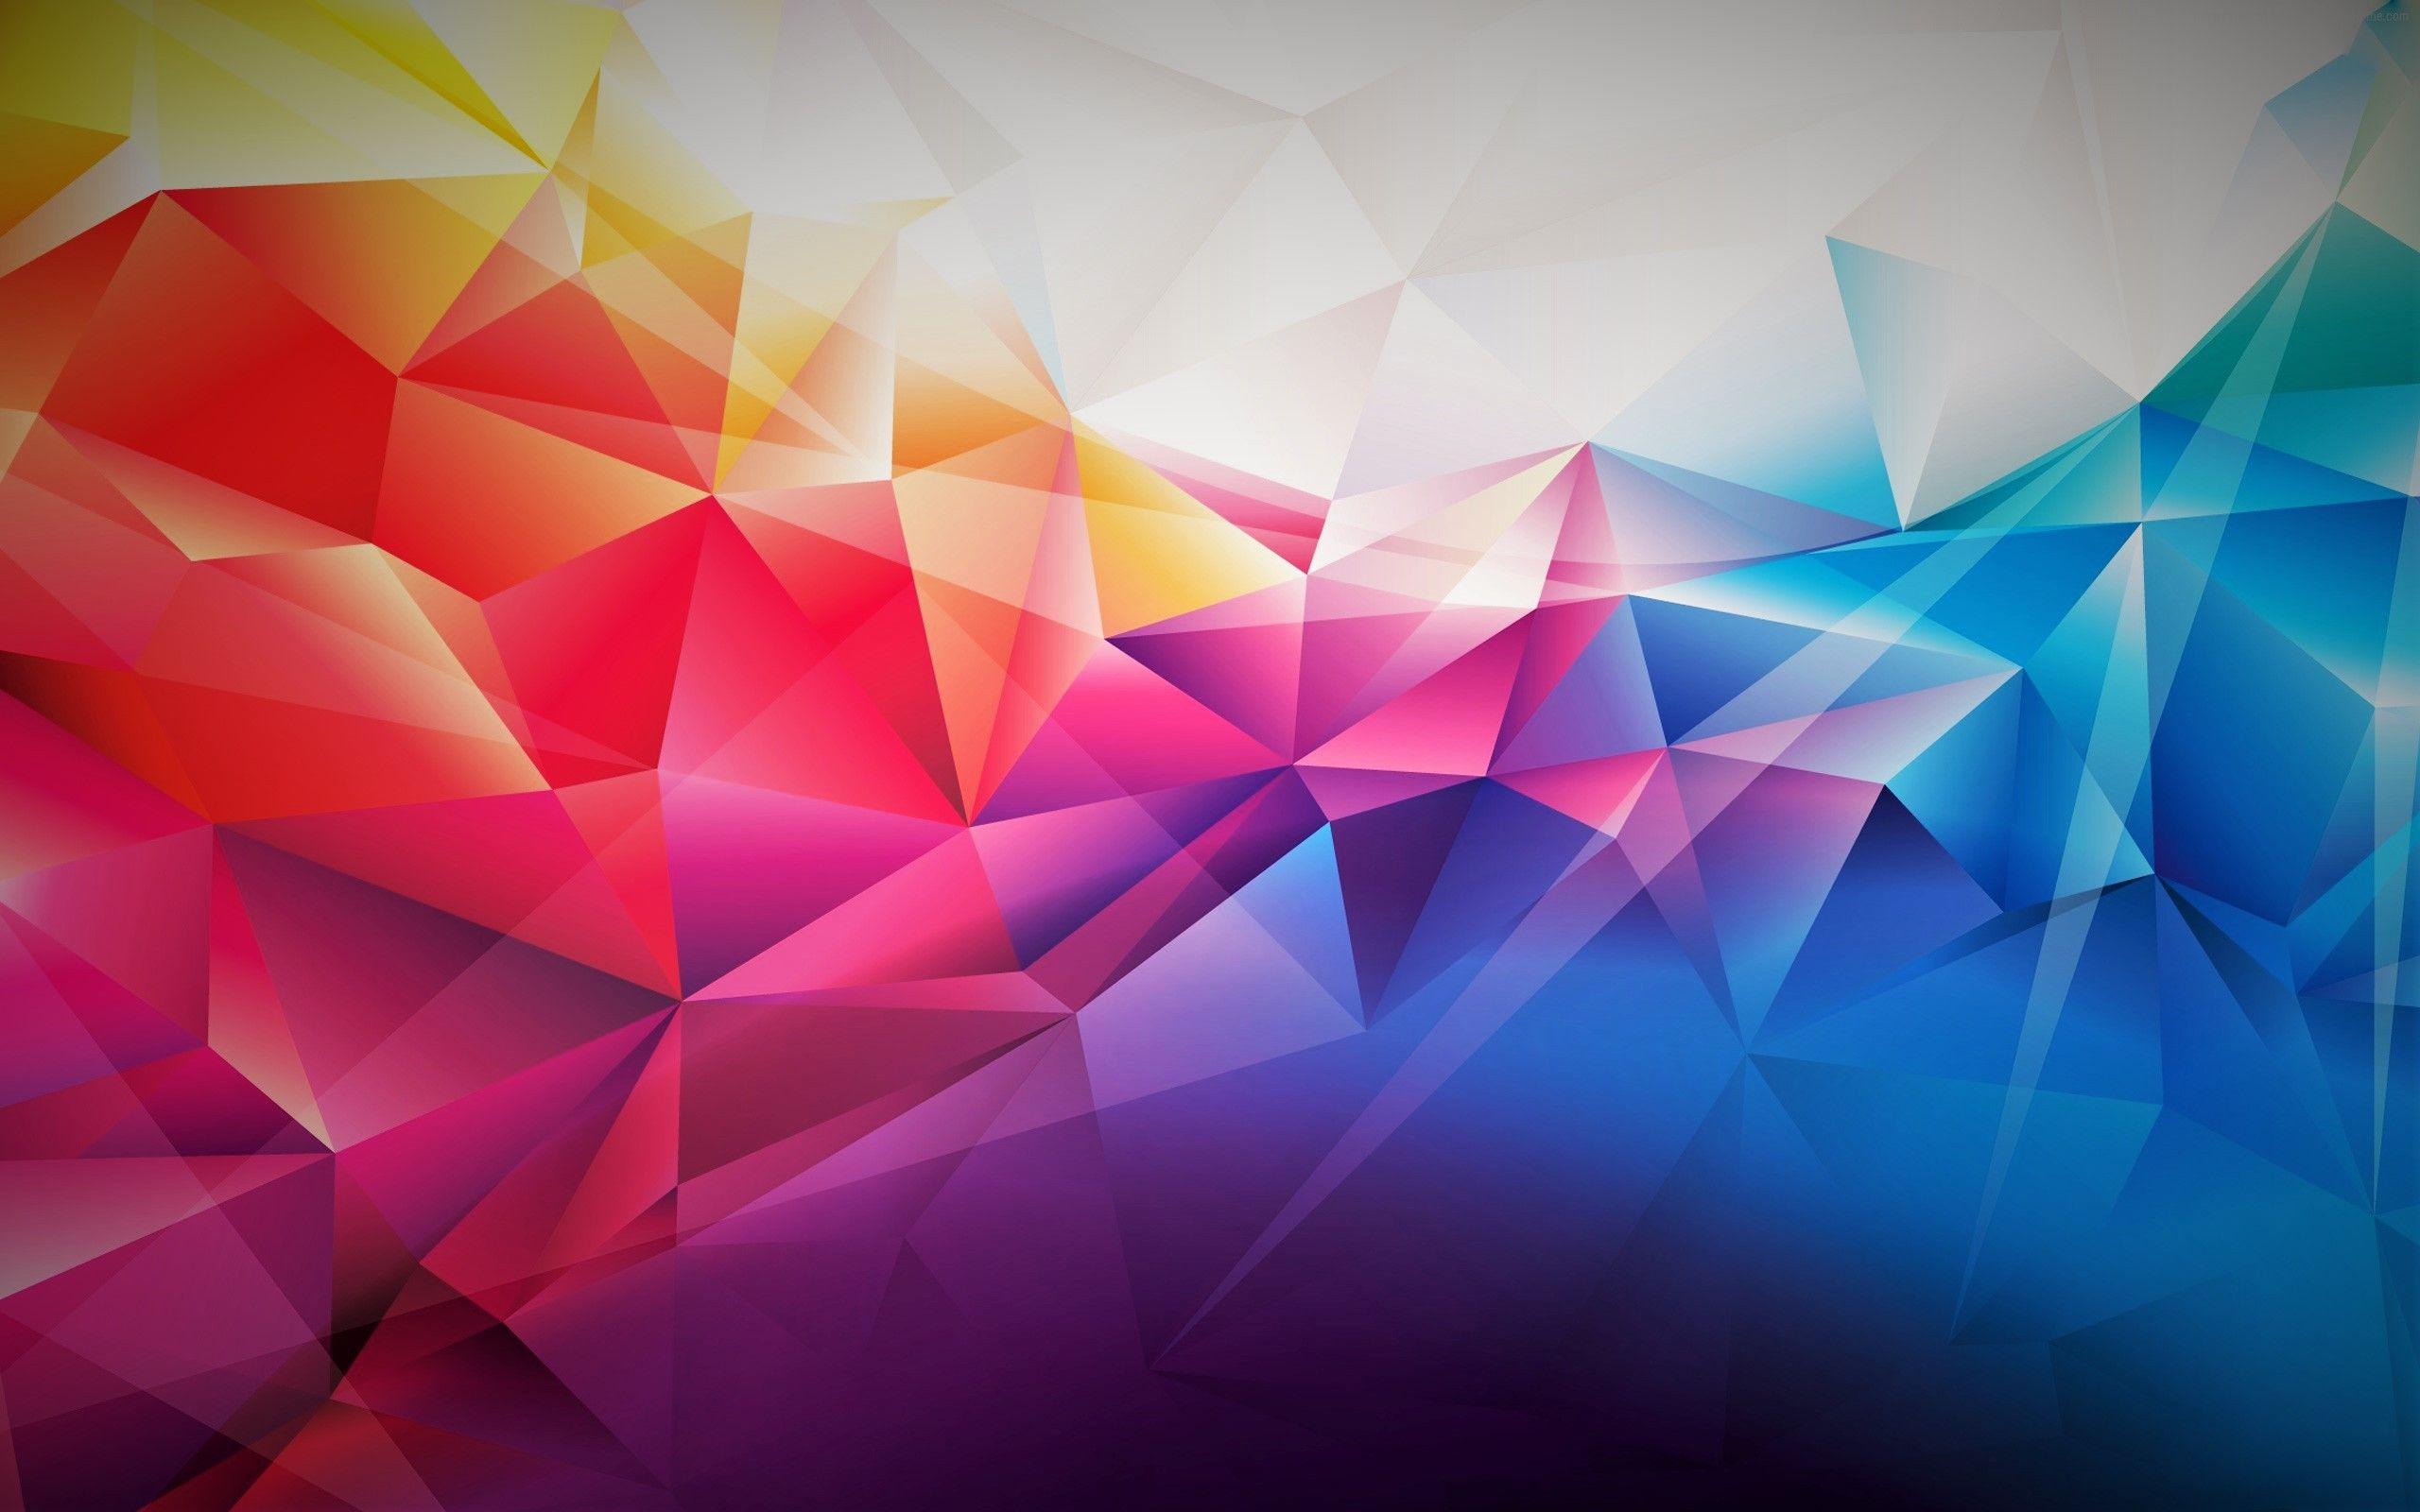 Wallpaper, colorful, illustration, abstract, red, purple, symmetry